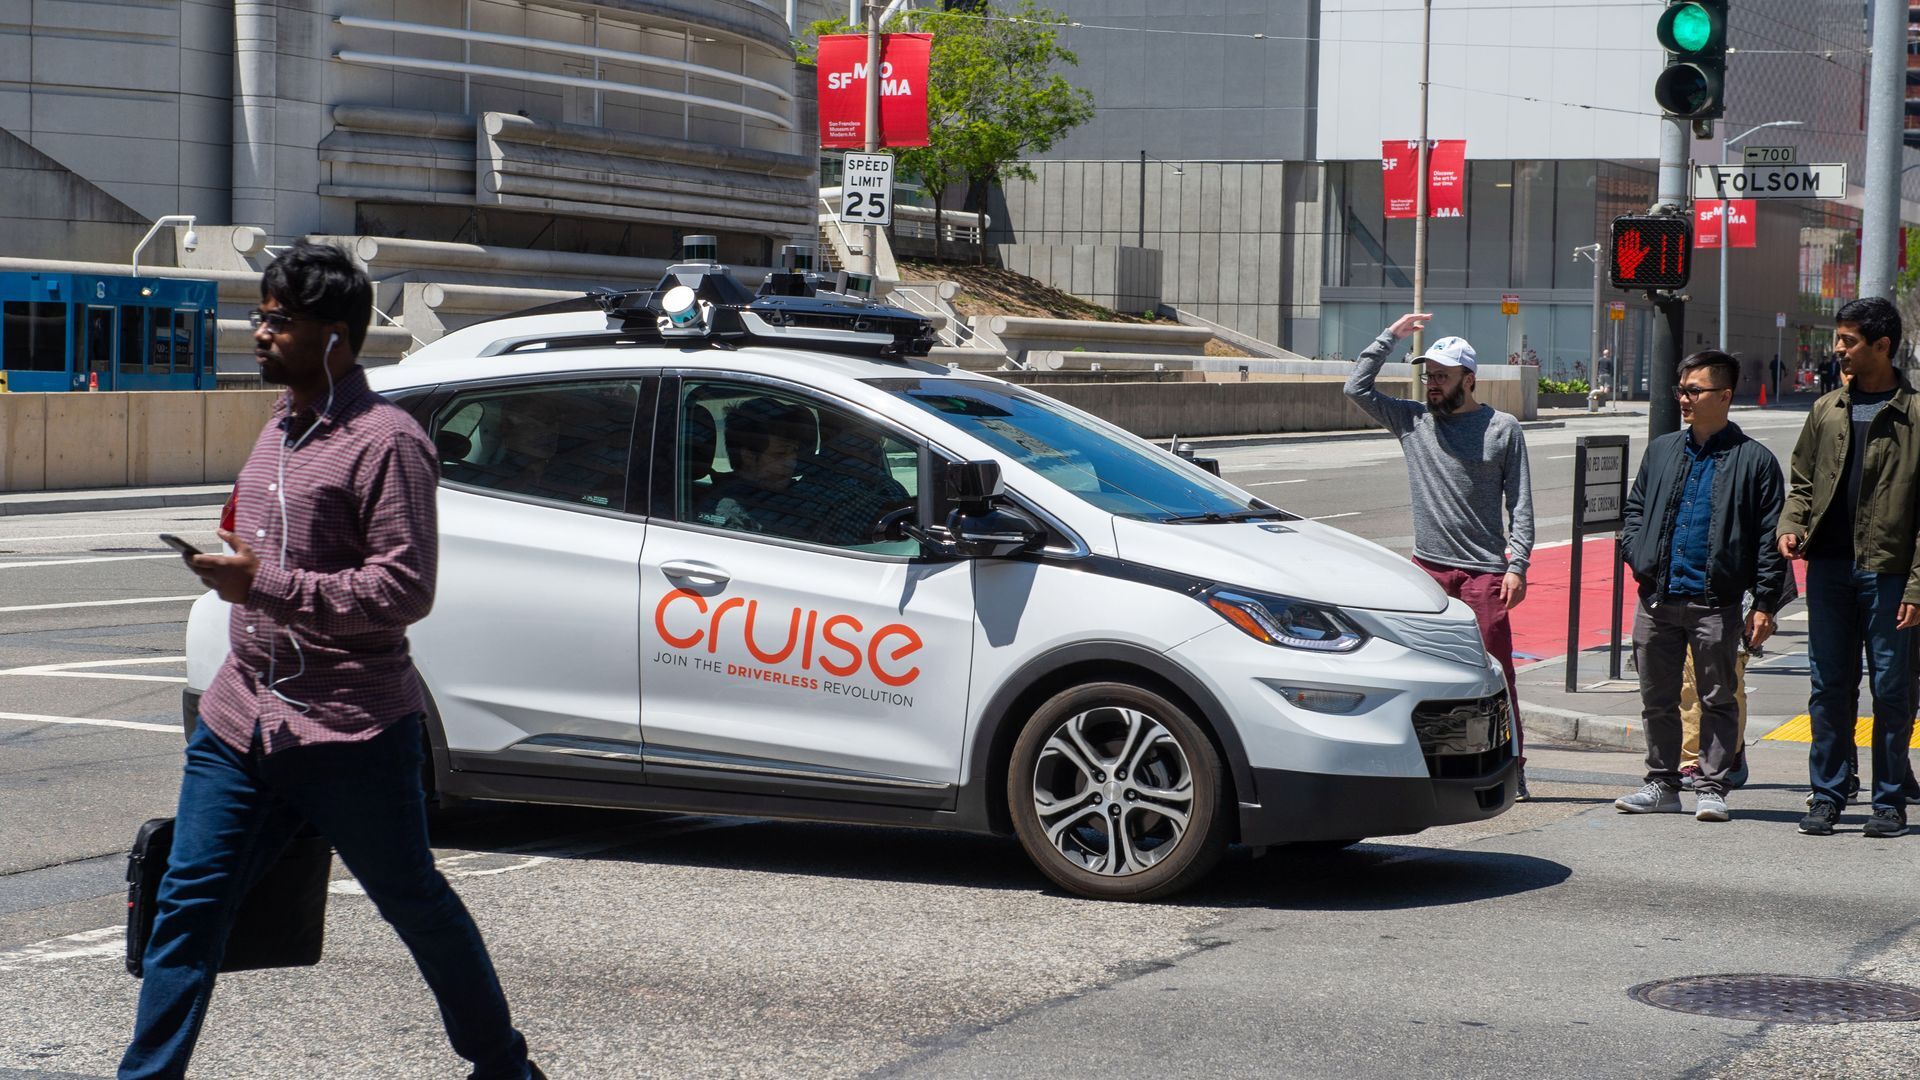 Cruise has been offering driverless ride-hailing services for years. However, the cars have difficulty detecting children.